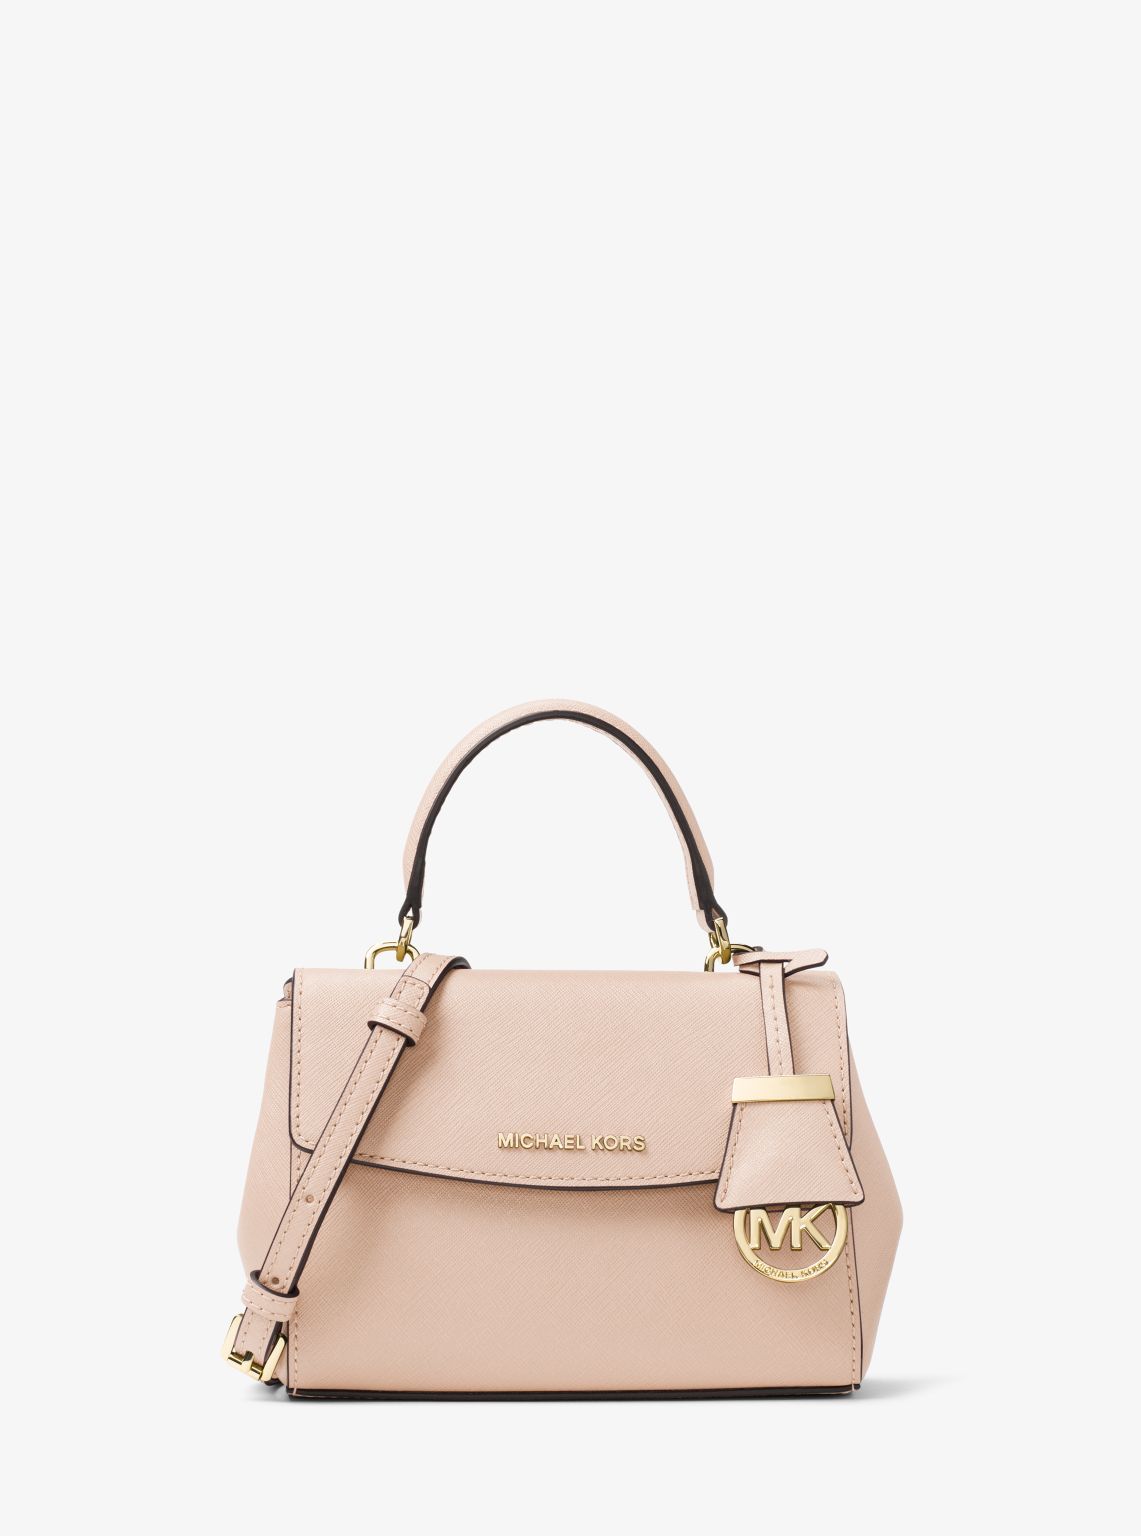 Michael Kors 'ava' Extra Small Perforated Leather Crossbody Bag